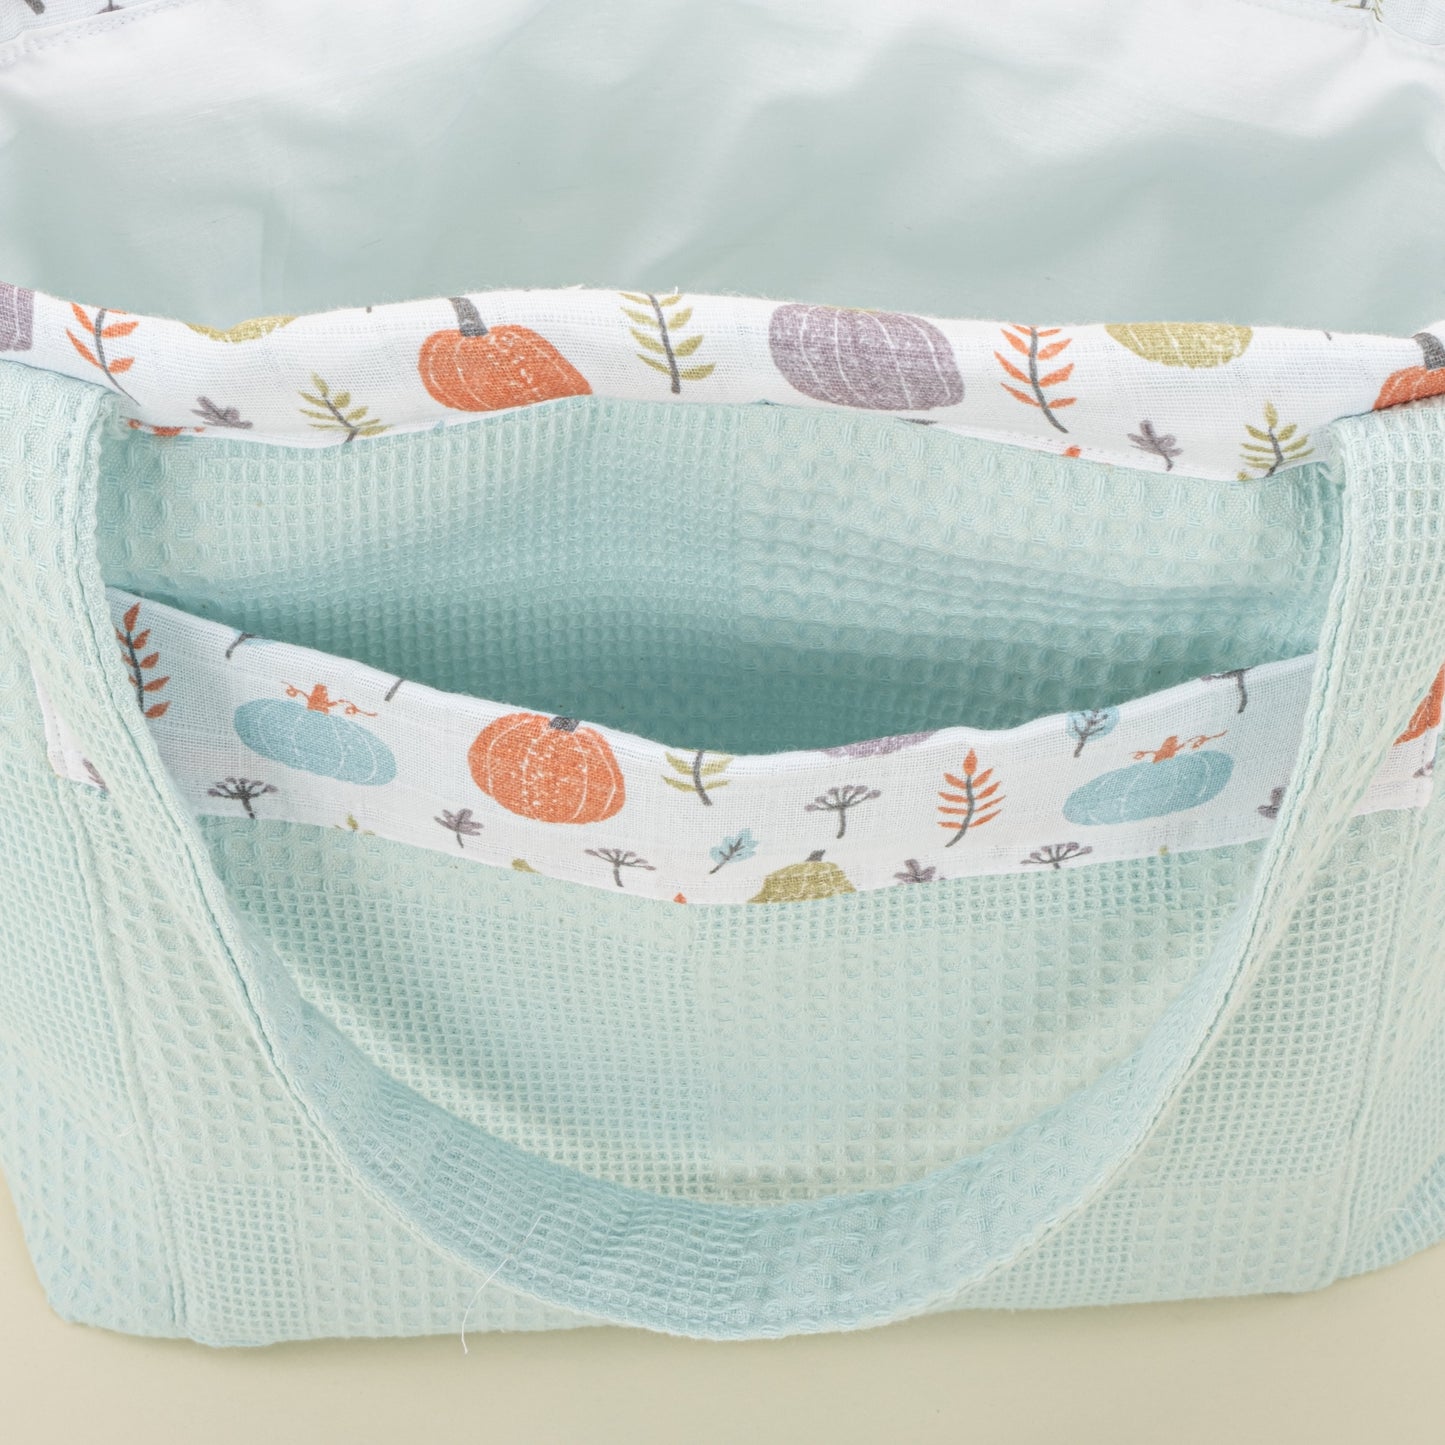 Baby Care Bag - Turquoise Honeycomb - Green Pumpkin